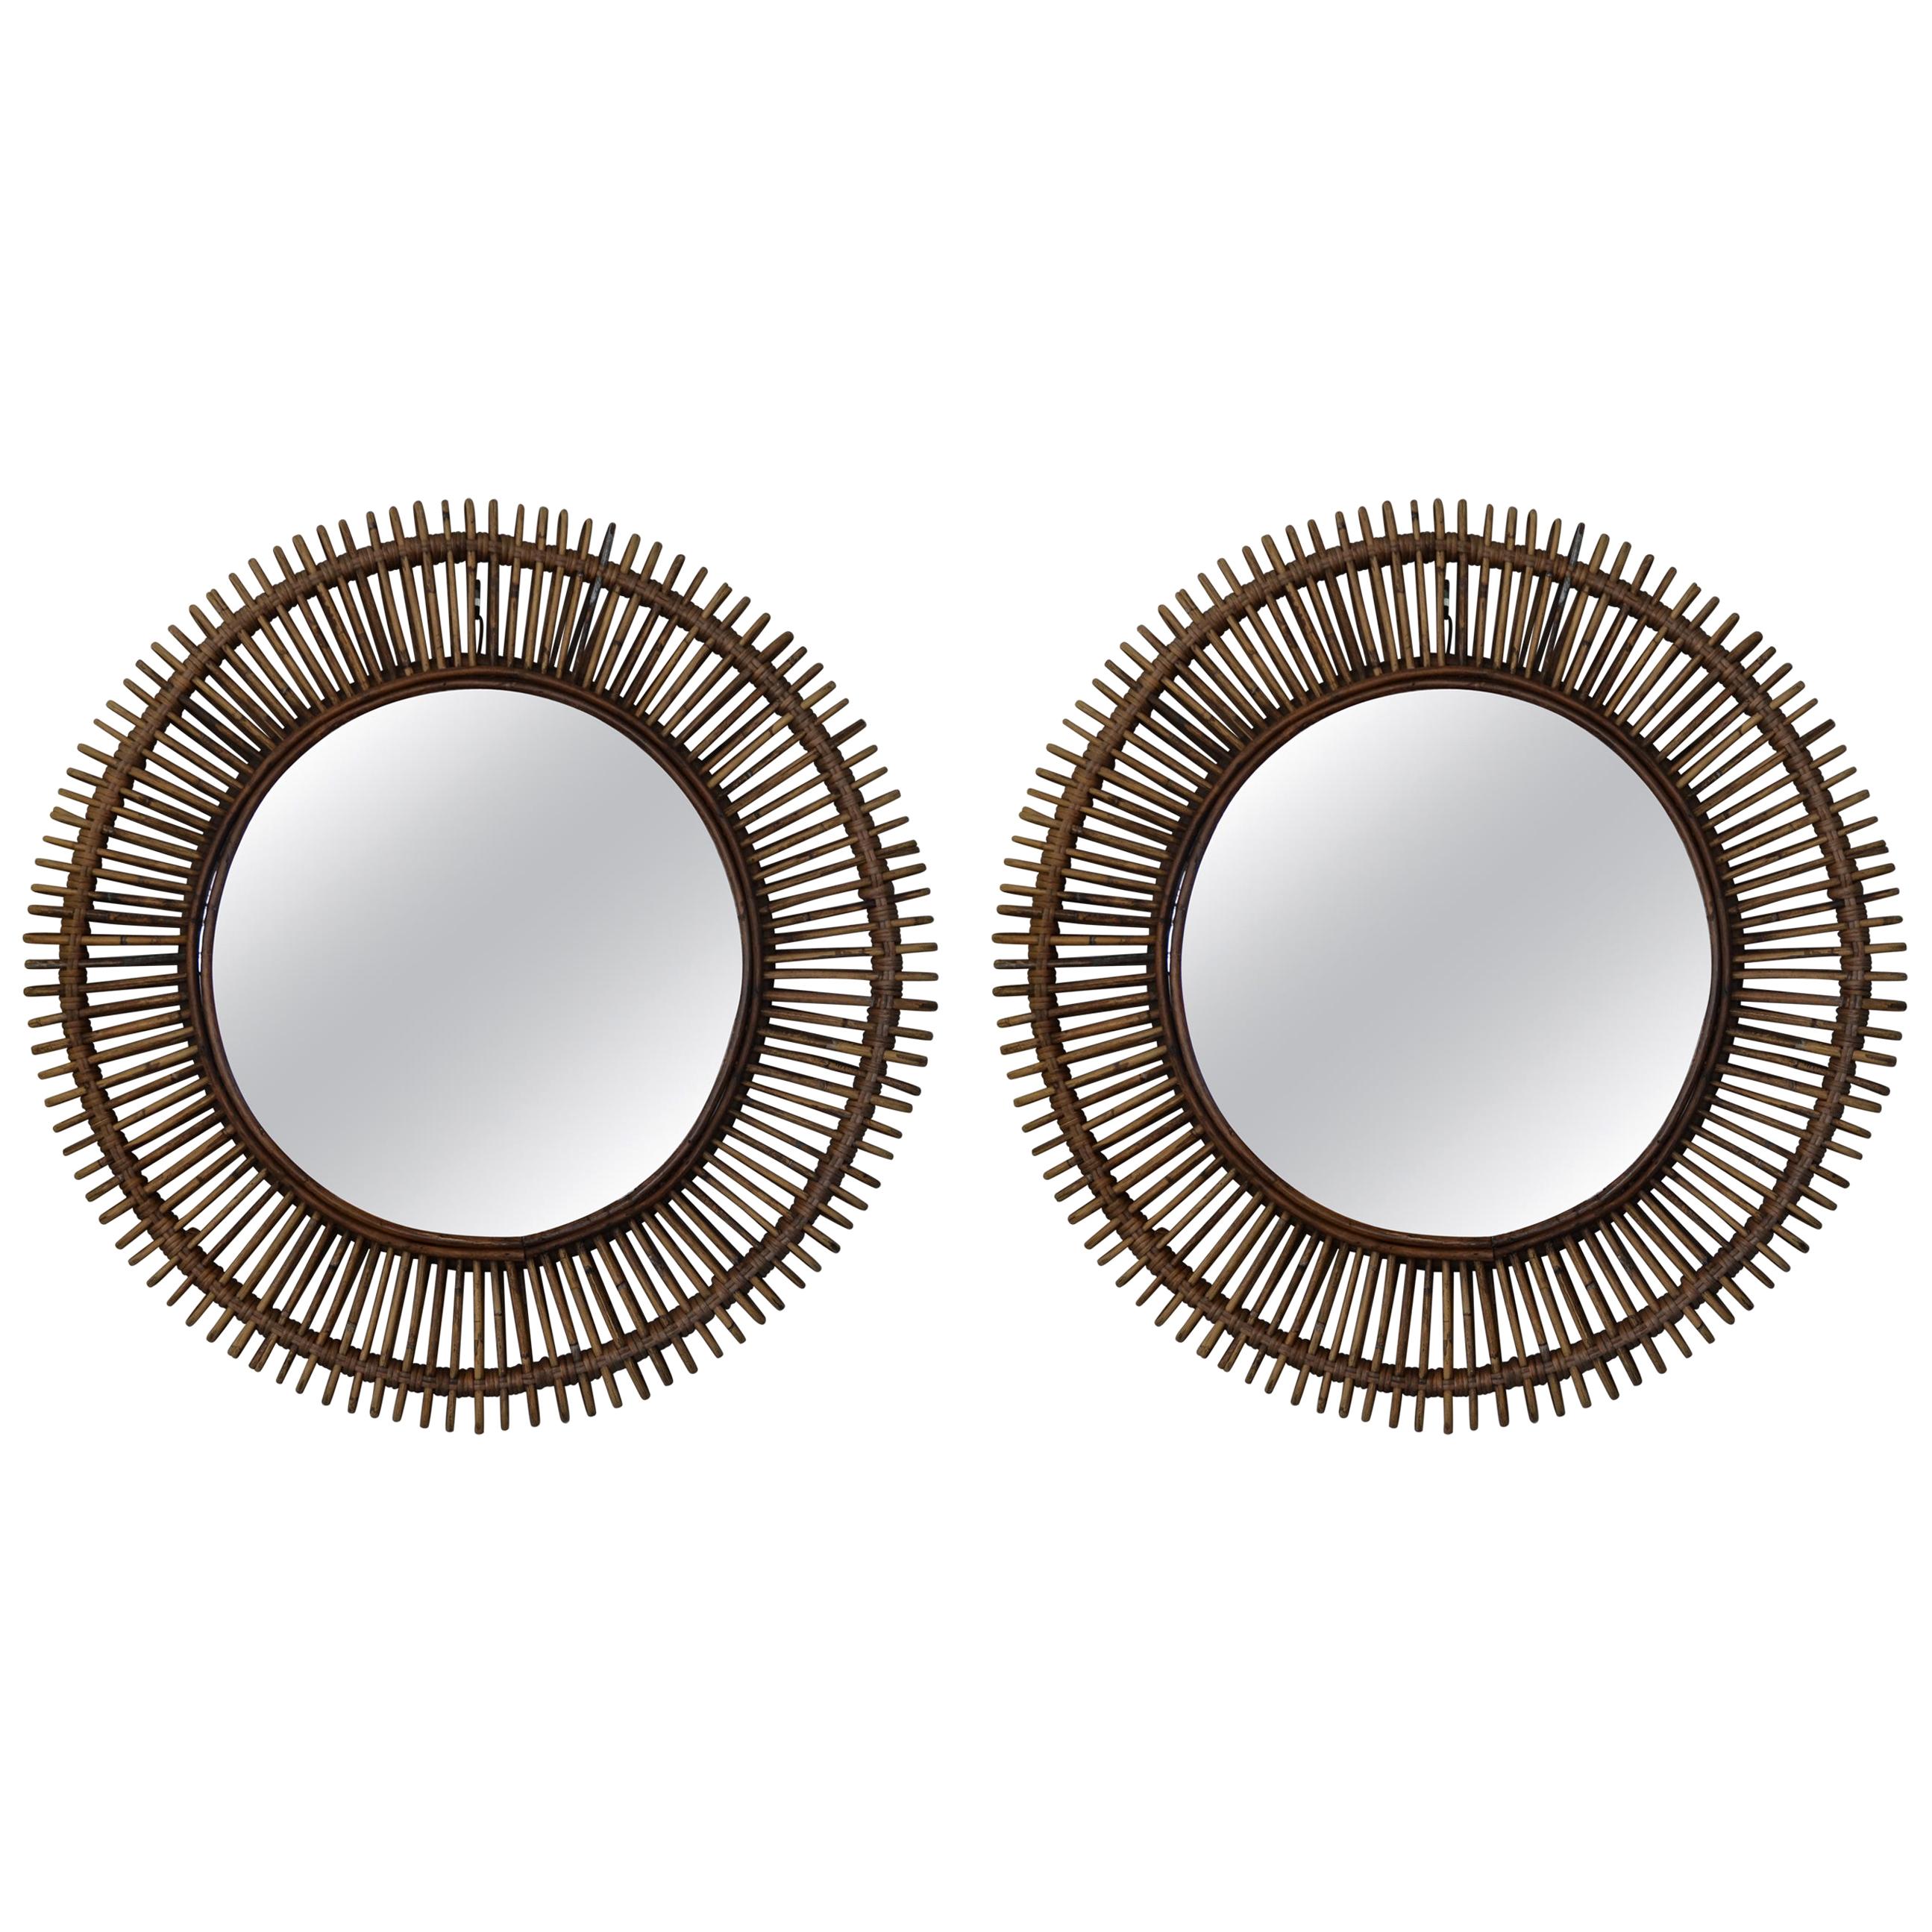 Pair of 'Oculus' Round Rattan Mirrors by Design Frères